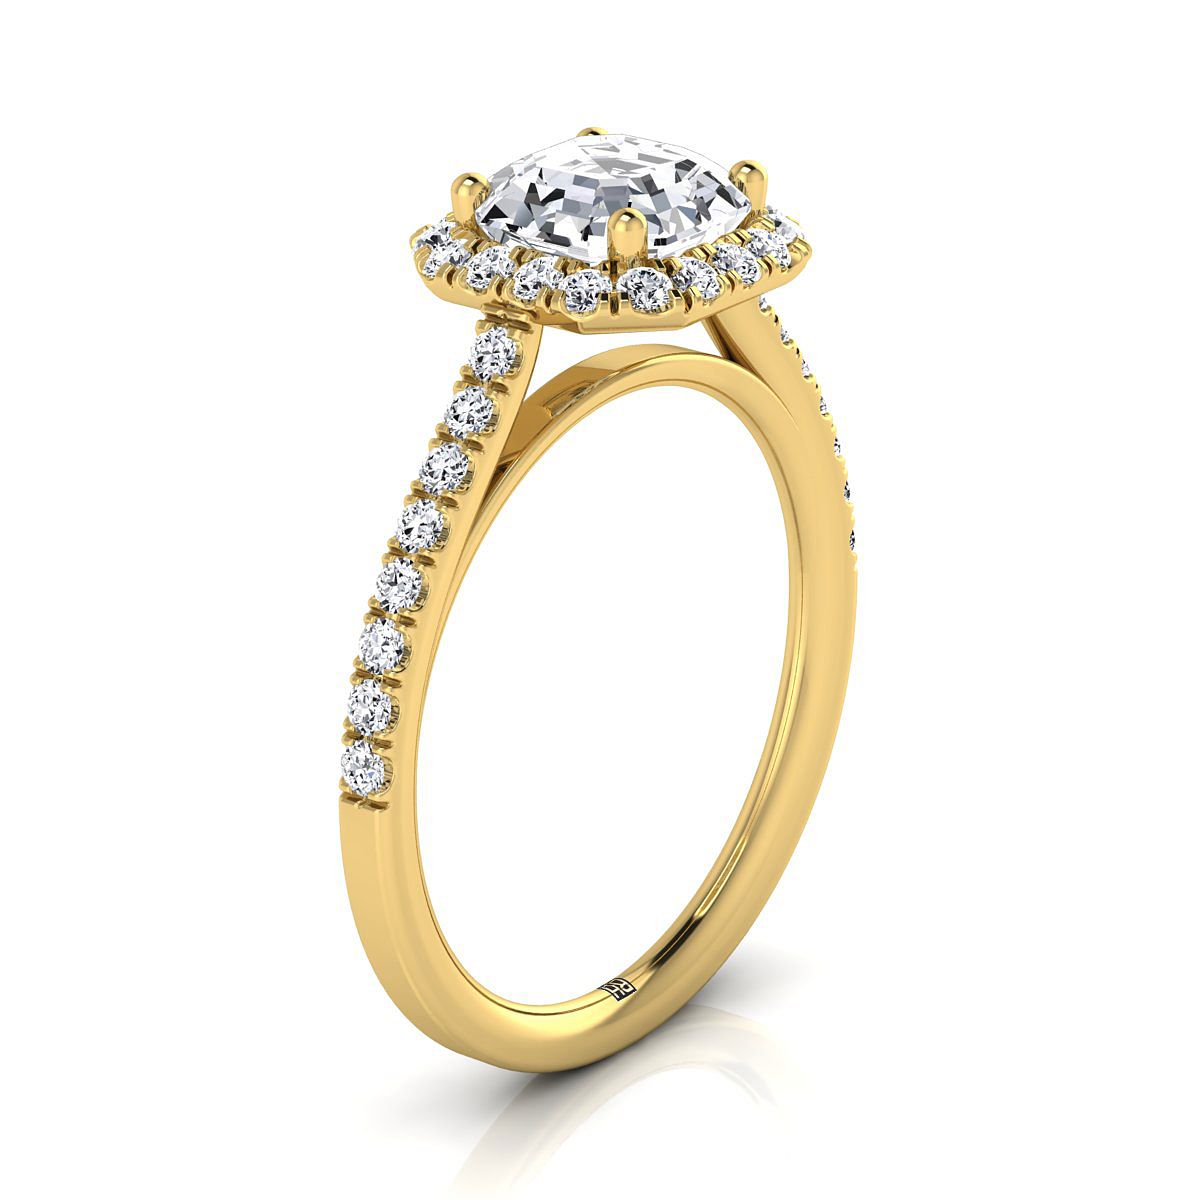 18K Yellow Gold Asscher Cut Diamond Petite Halo French Pave Engagement Ring -3/8ctw